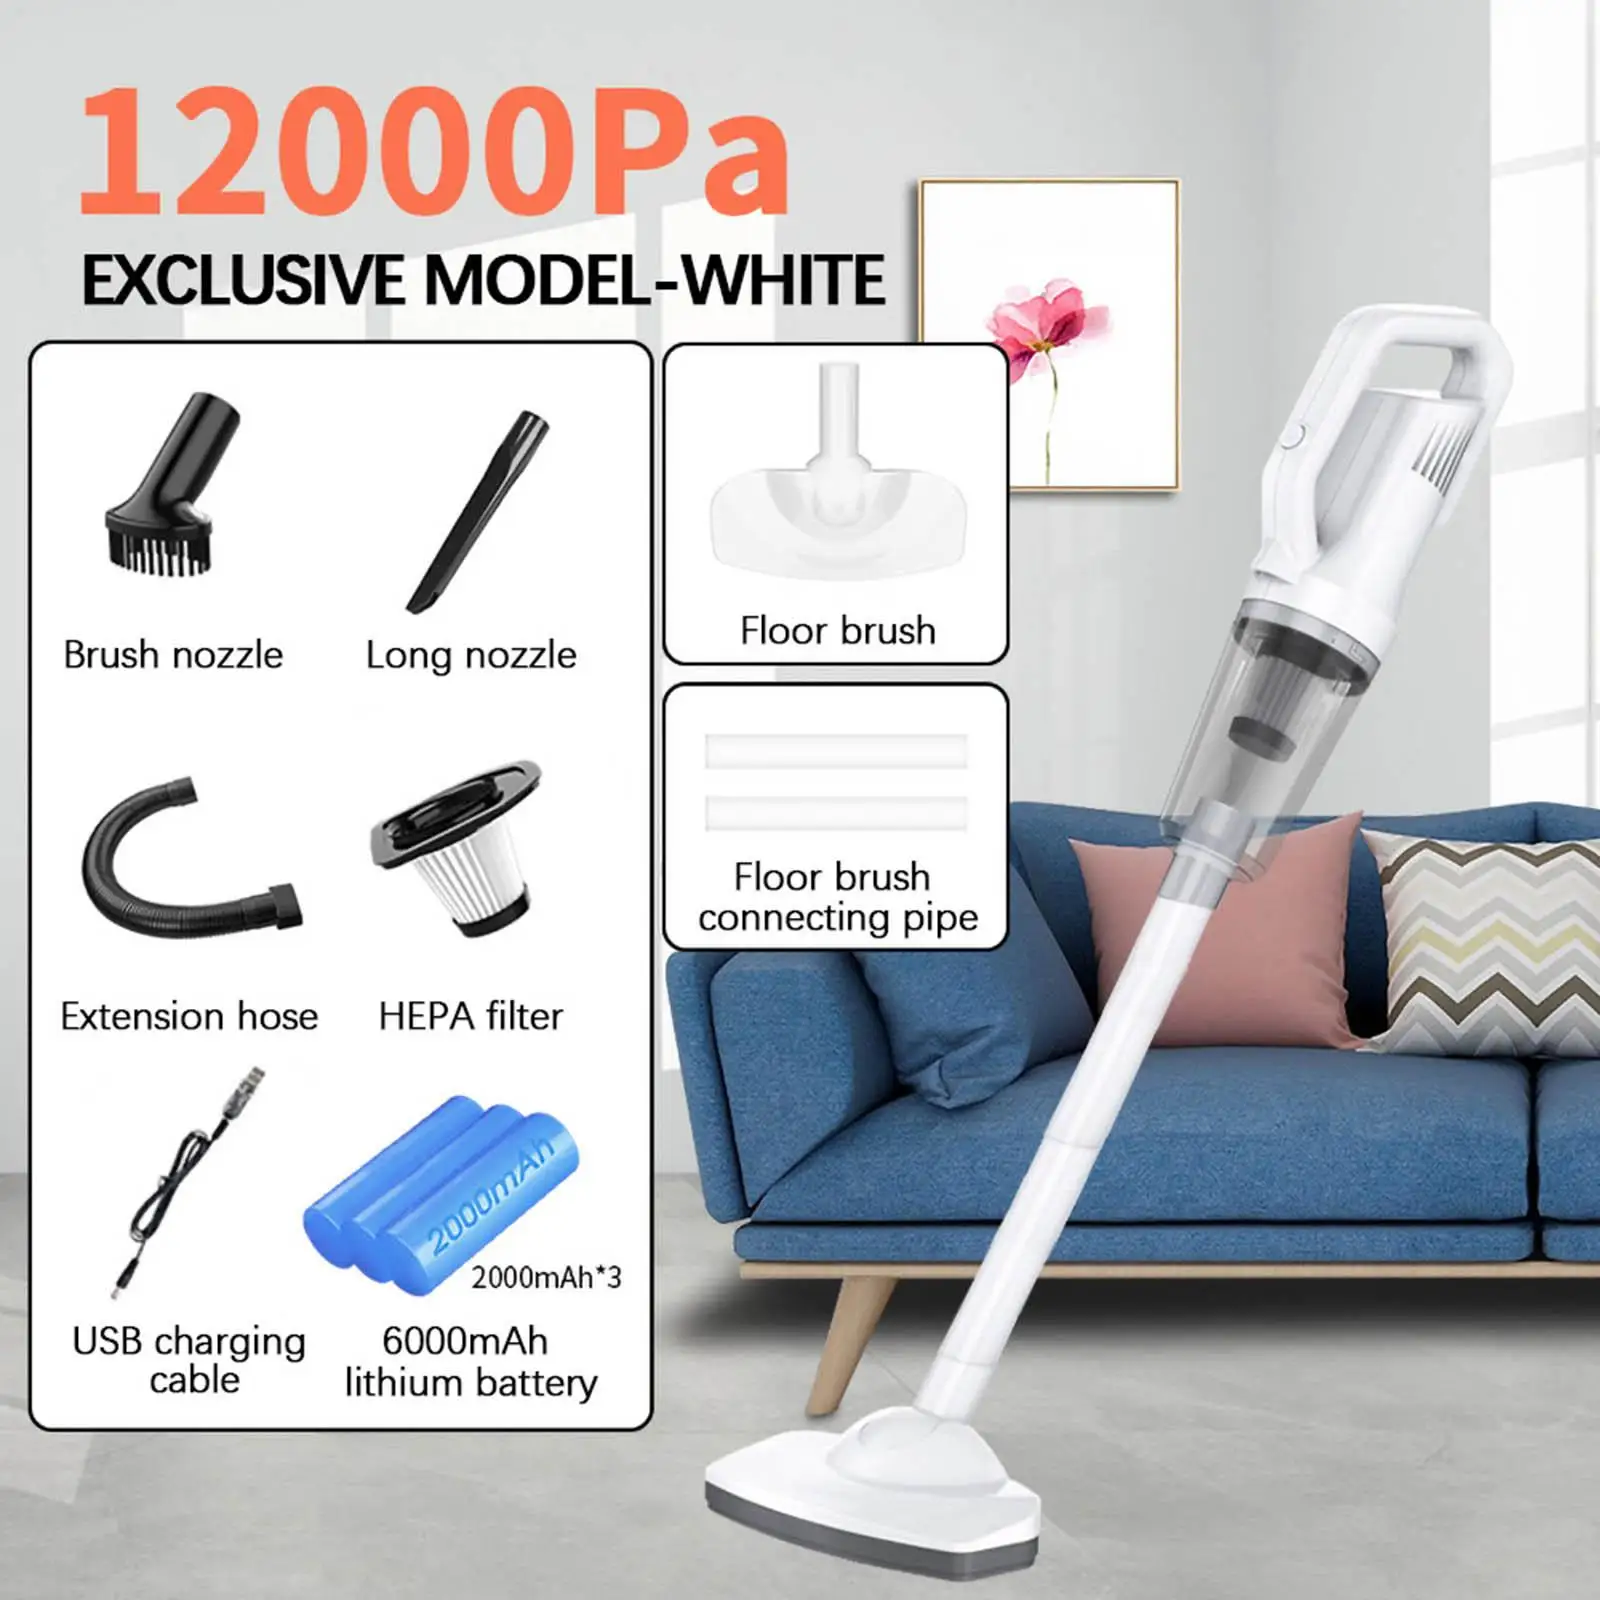 Portable Cordless Vacuum Cleaner with HEPA Filter Detachable USB Rechargeable Lightweight for Home Computer Office Keyboard Sofa